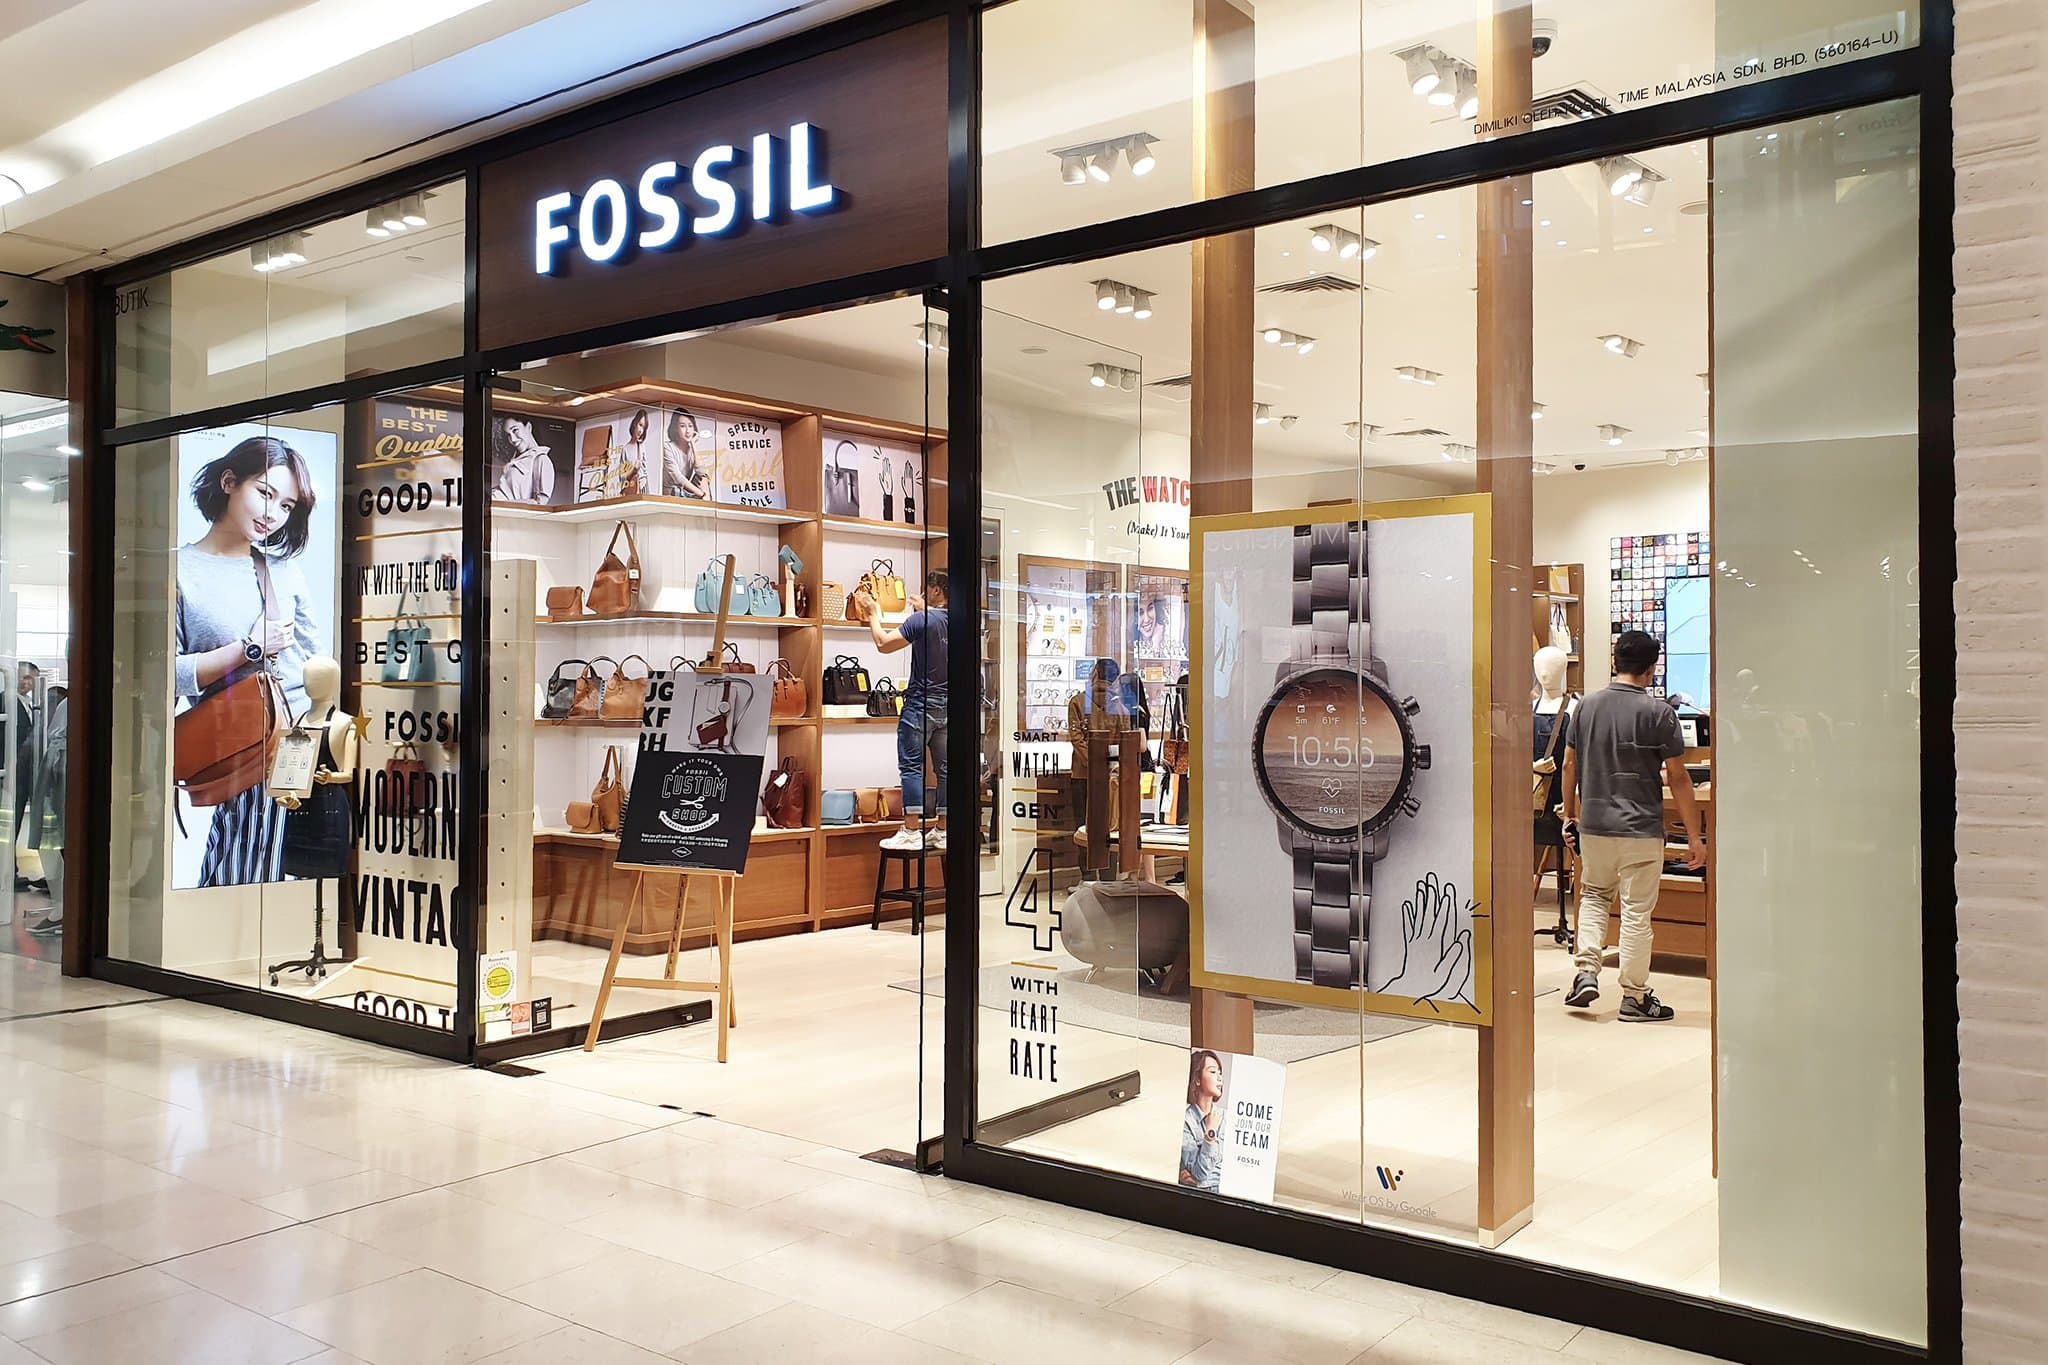 Fossil started out as a watch brand and later expanded into a leather goods, clothing, and jewelry company